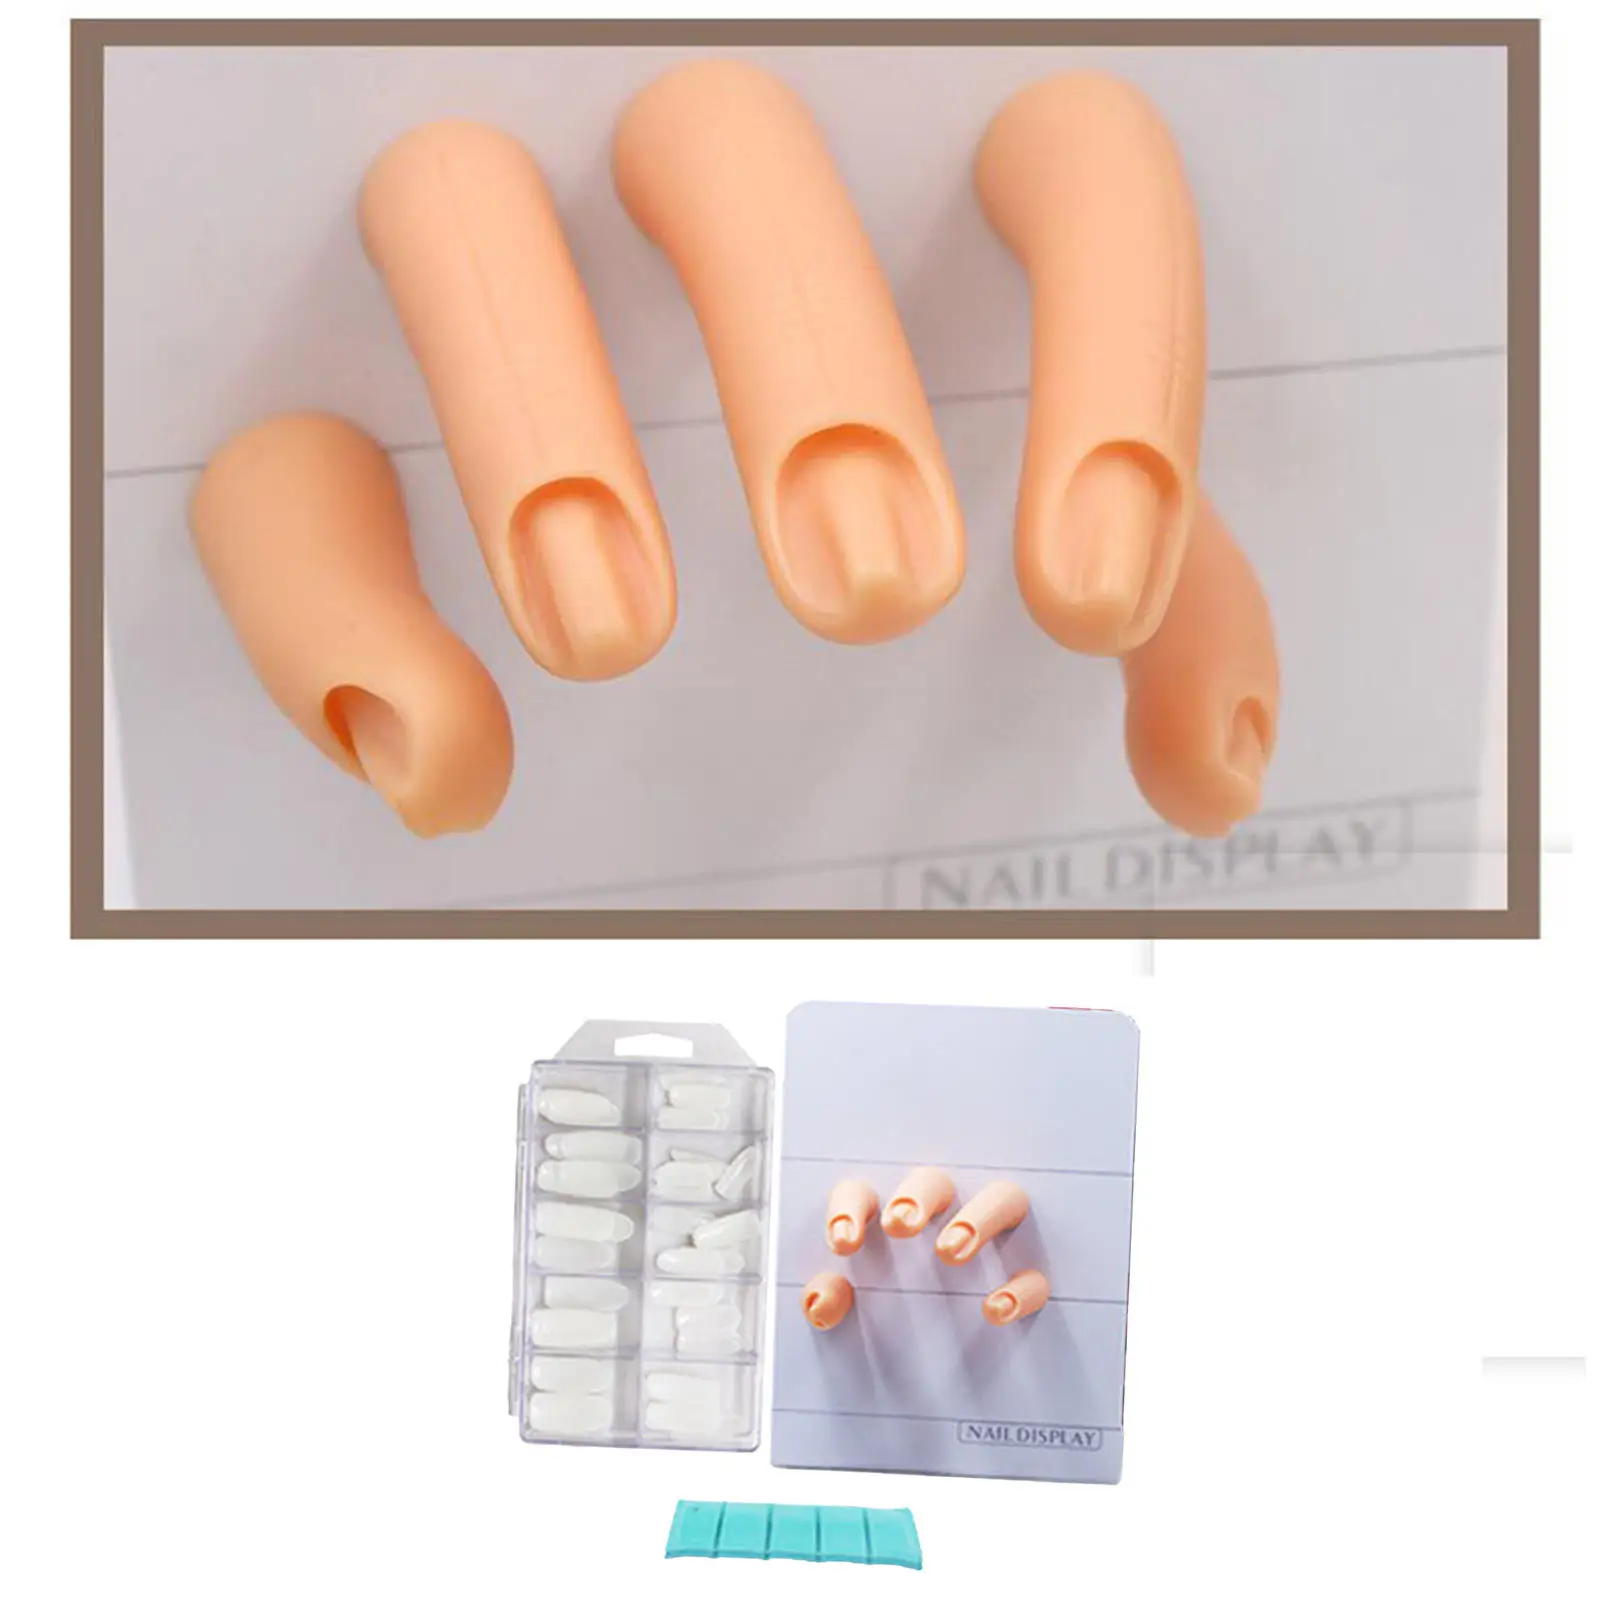 Movable Nail Art Training Tool Decoration Design Learning Silicone Manicure Supply Magnetic Plastic Training Hand for Beginners